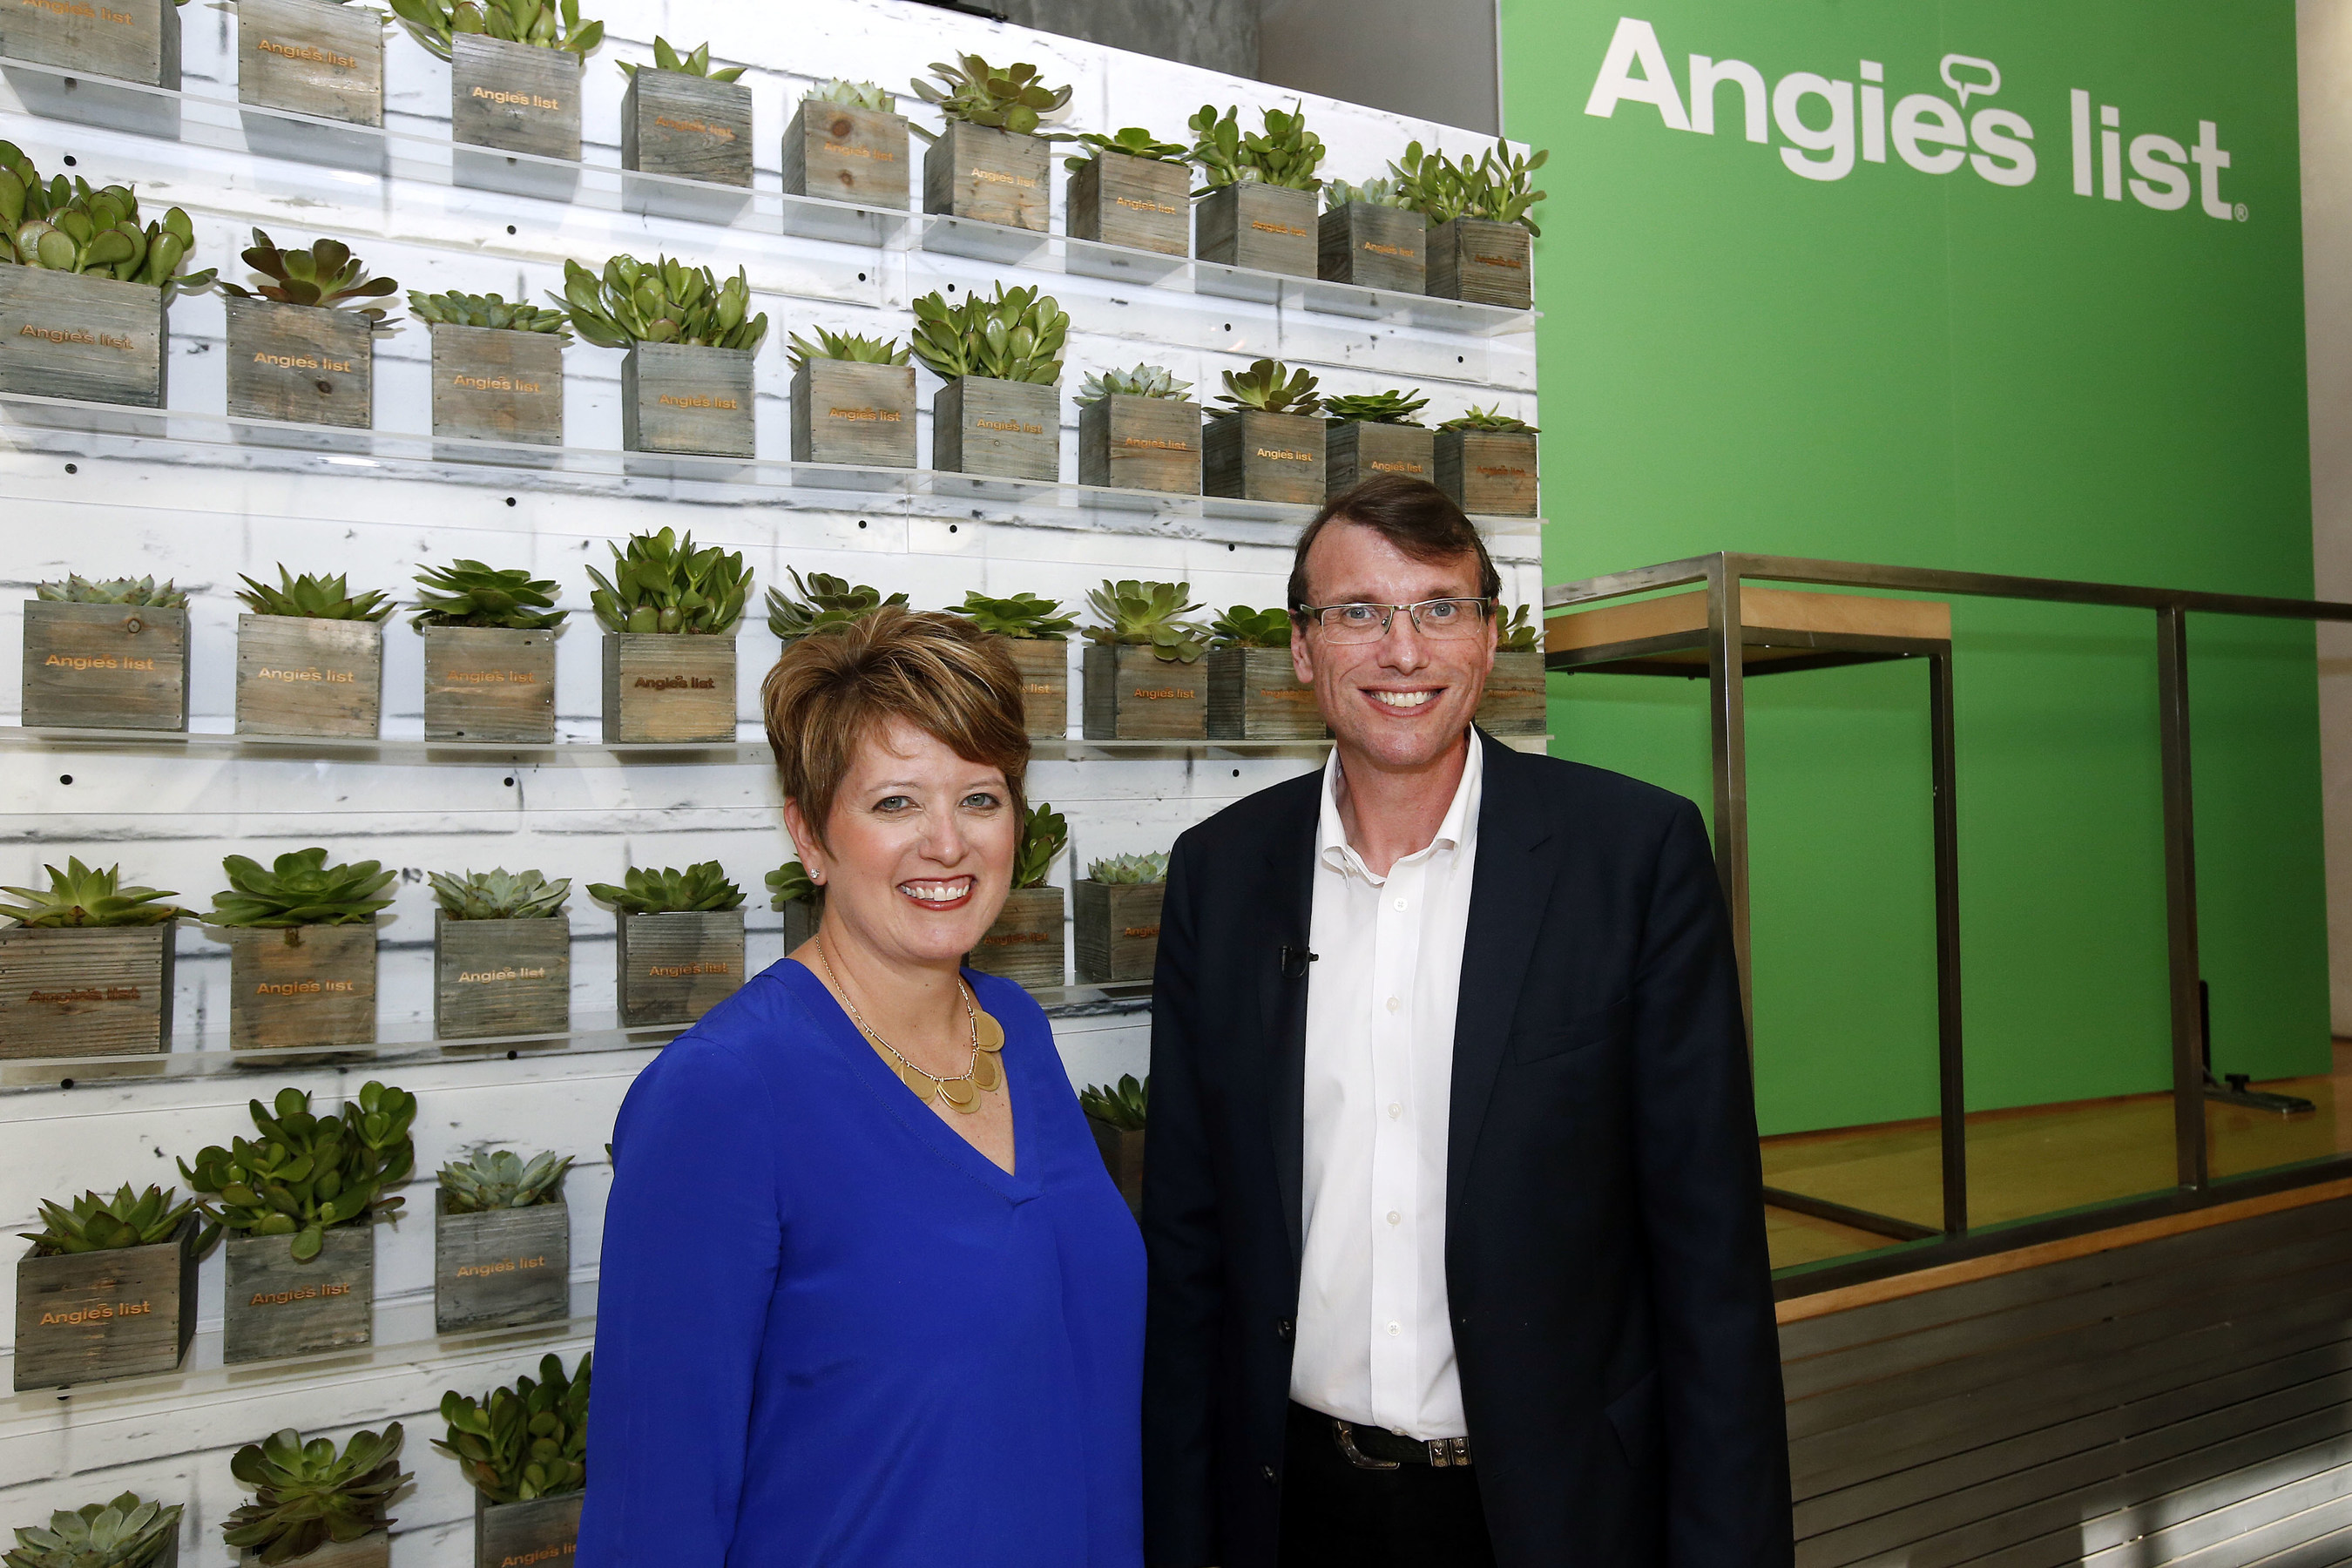 Scott Durchslag, Angie's List CEO and Angie Hicks, Angie's List Founder and CMO announce that the site is now free to join at an official launch event on Tuesday, July 12, 2016, in New York. This change allows unparalleled access to the more than 10 million verified reviews on home service professionals that Angie's List has amassed over its 21 year history - more than double its nearest competitor. (Jason DeCrow/AP Images for Angie's List)